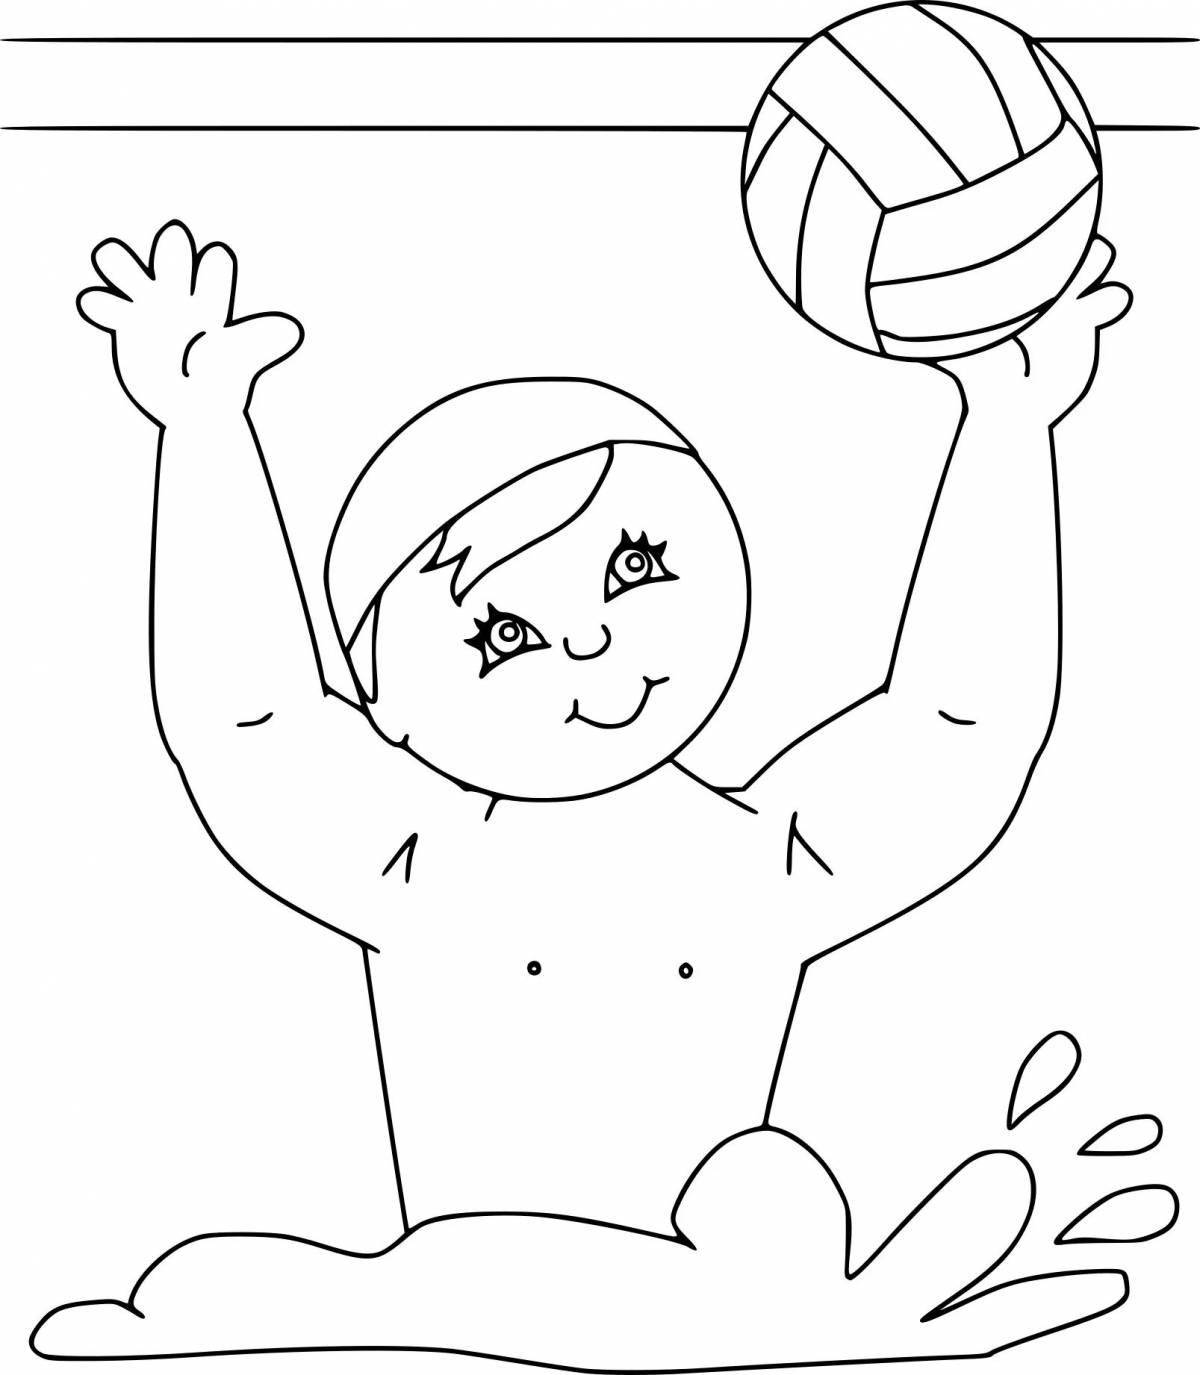 Fun coloring book about healthy lifestyle for kids